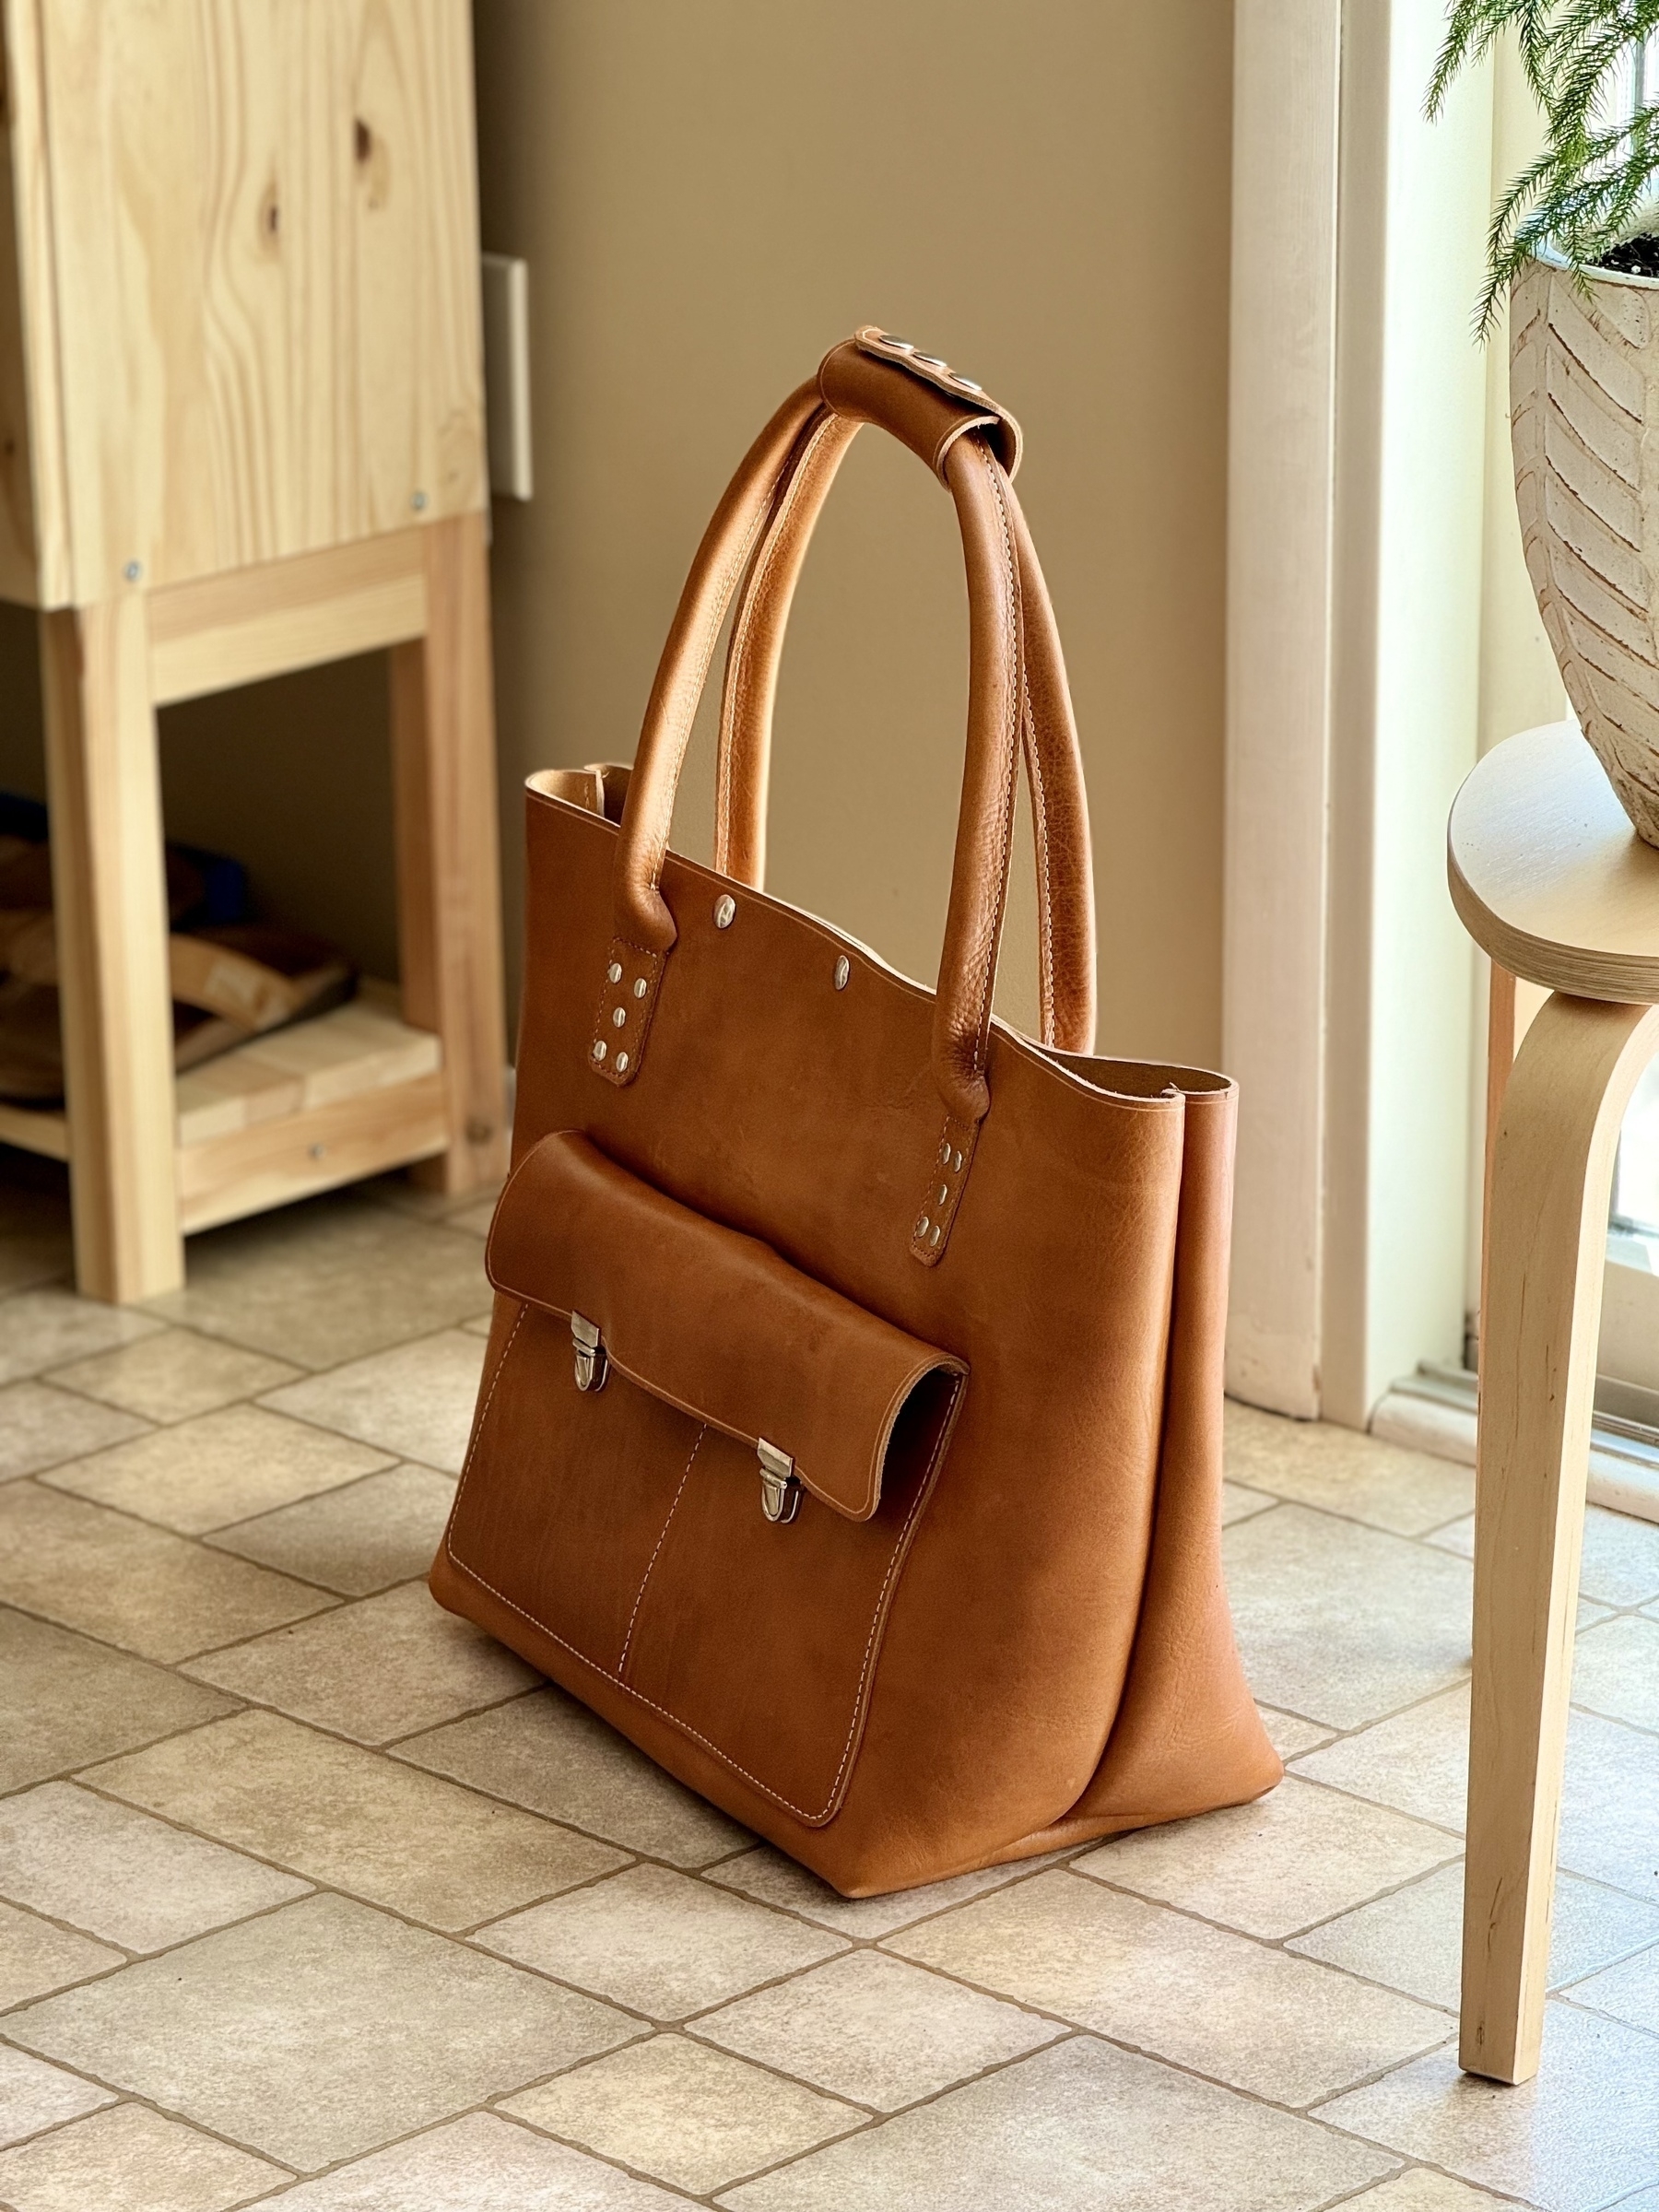 A stylish tan leather handbag (called “Ocean Front”) with a front pocket is placed on a tiled floor near some light-colored wooden furniture.